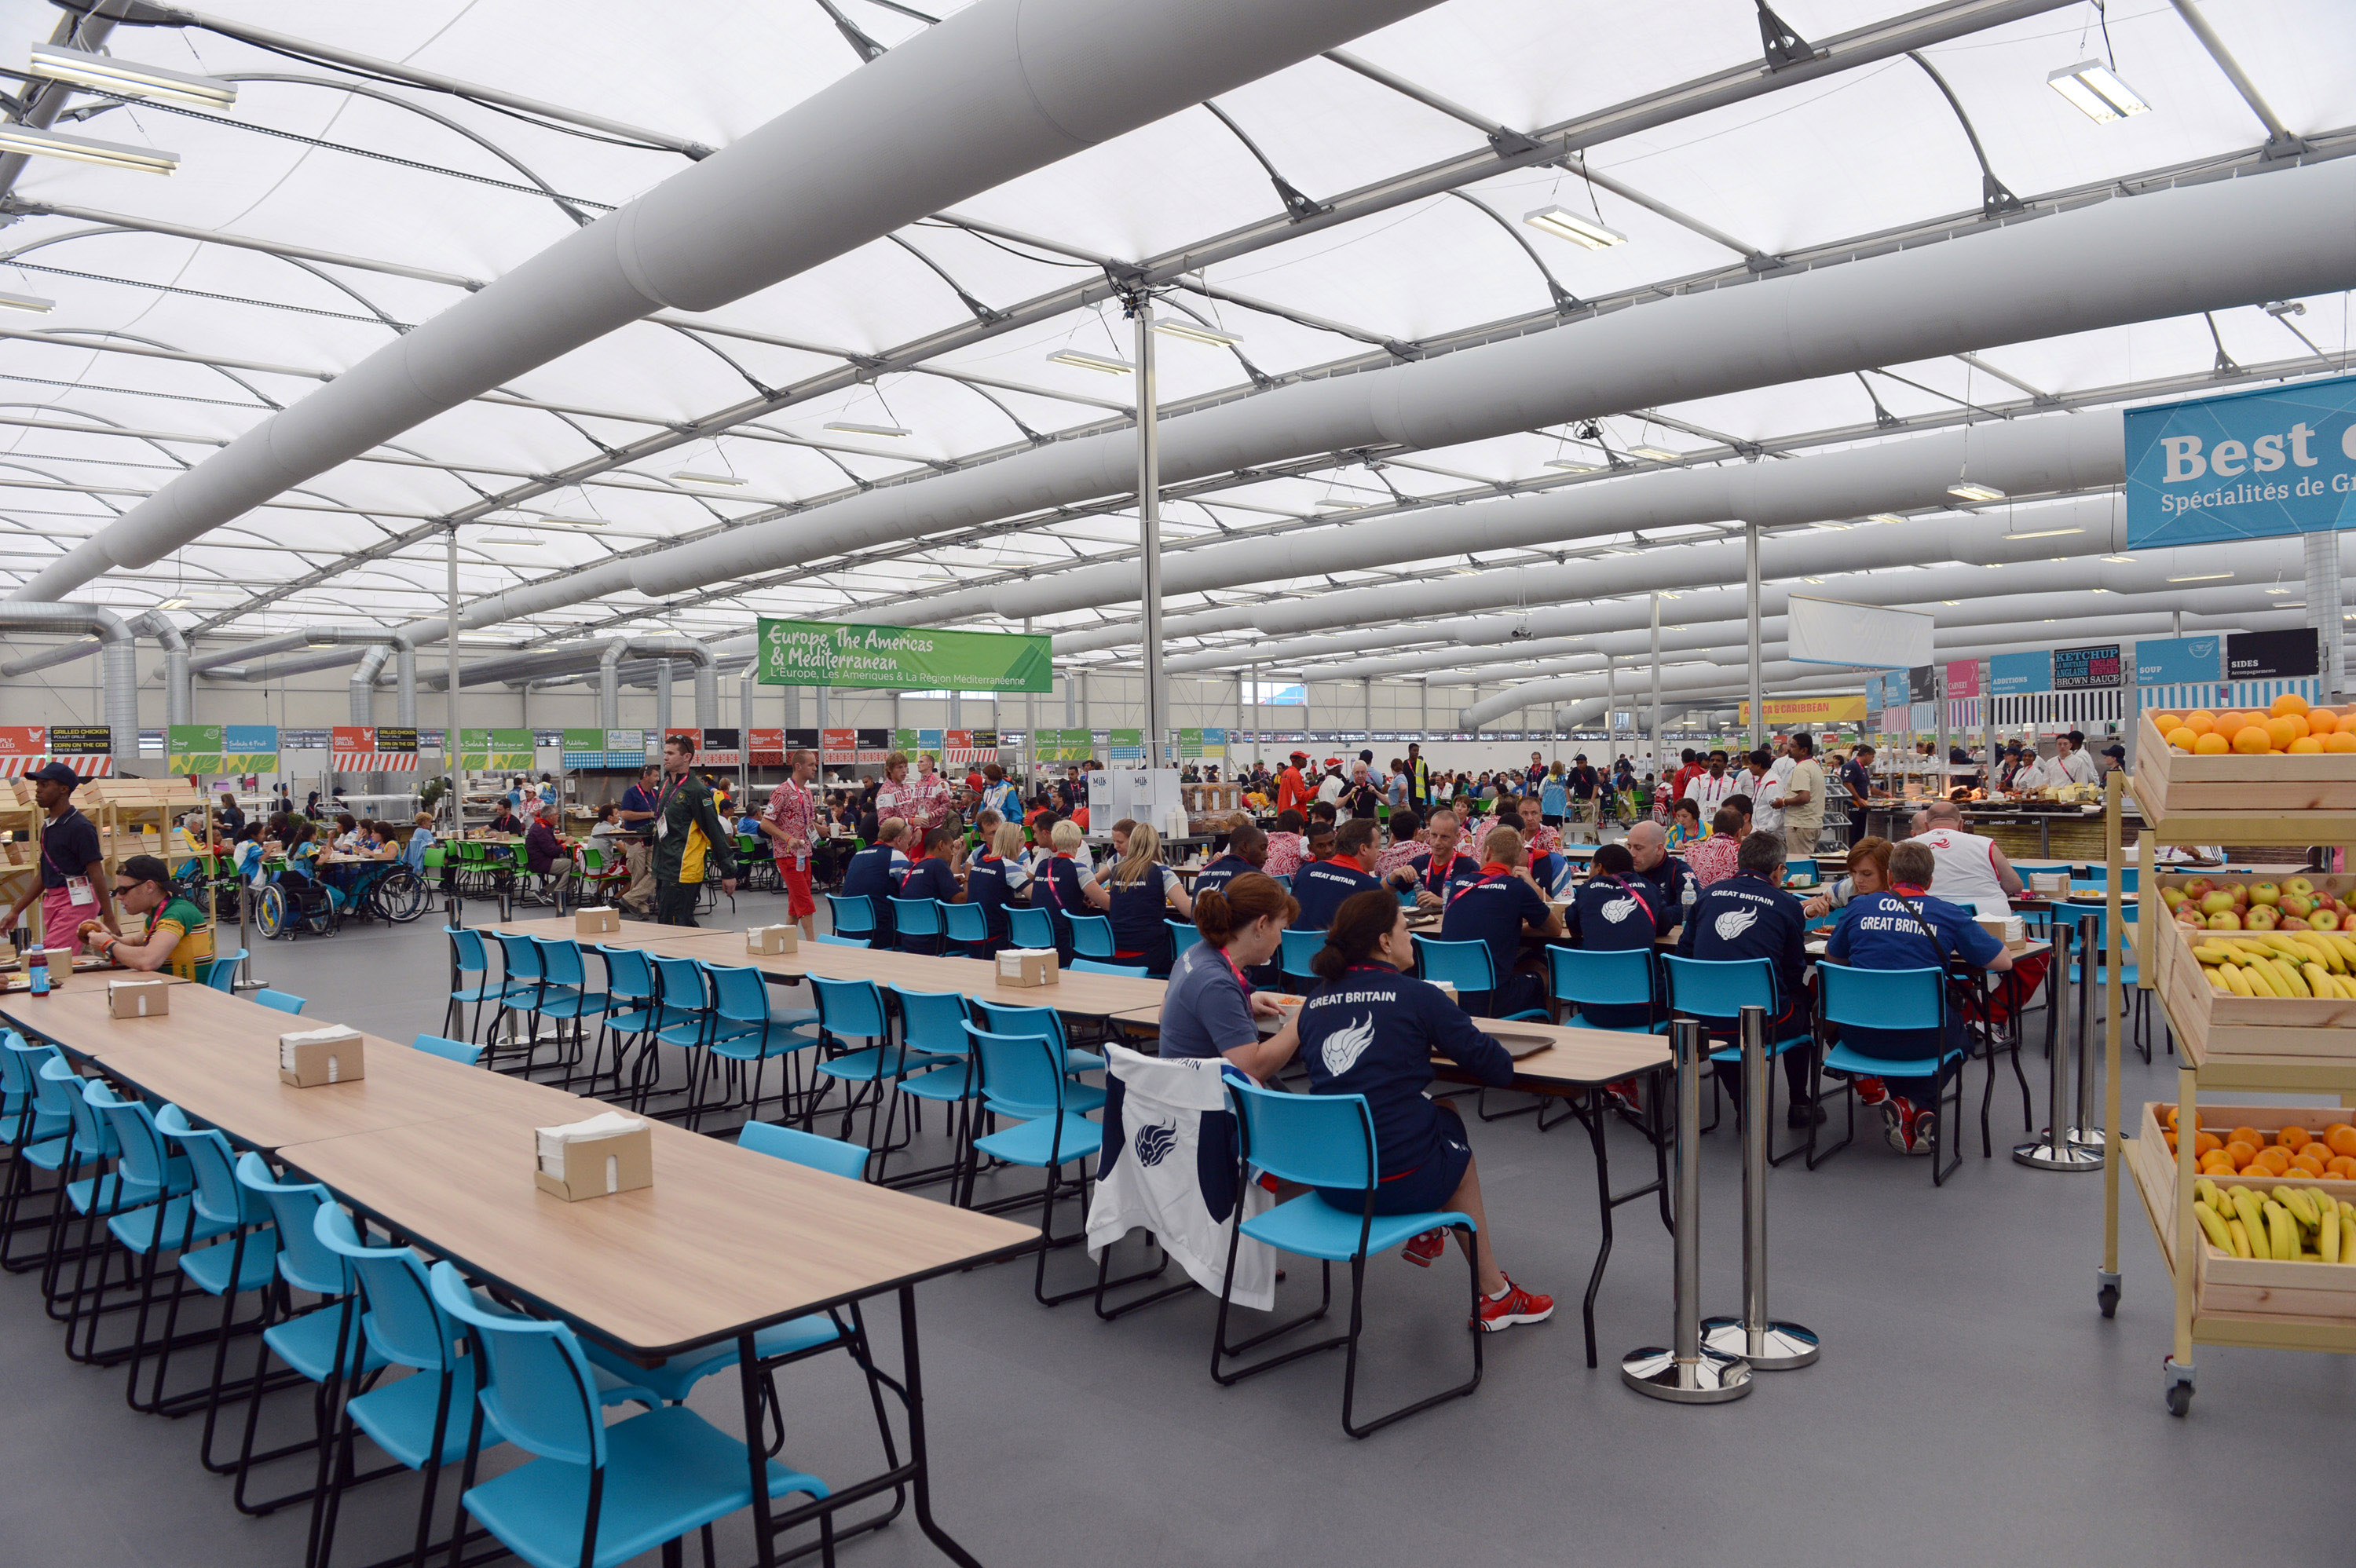 the Olympic dining hall in London